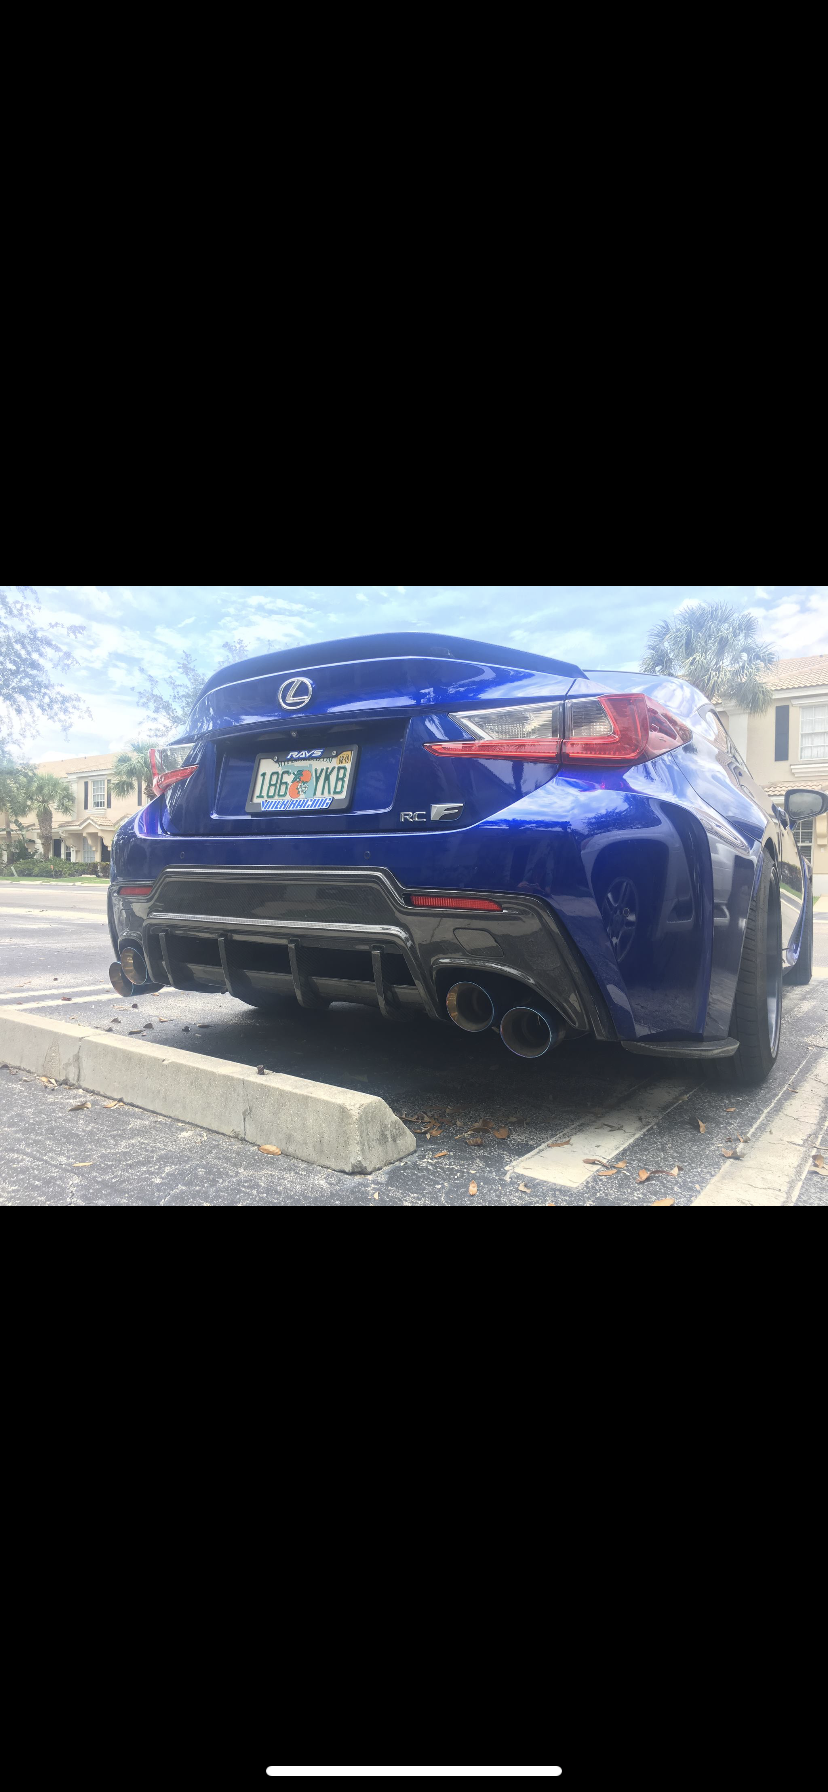 Exterior Body Parts - Toms CF rear bumper piece - Used - 2015 to 2019 Lexus RC F - West Palm Beach, FL 33417, United States